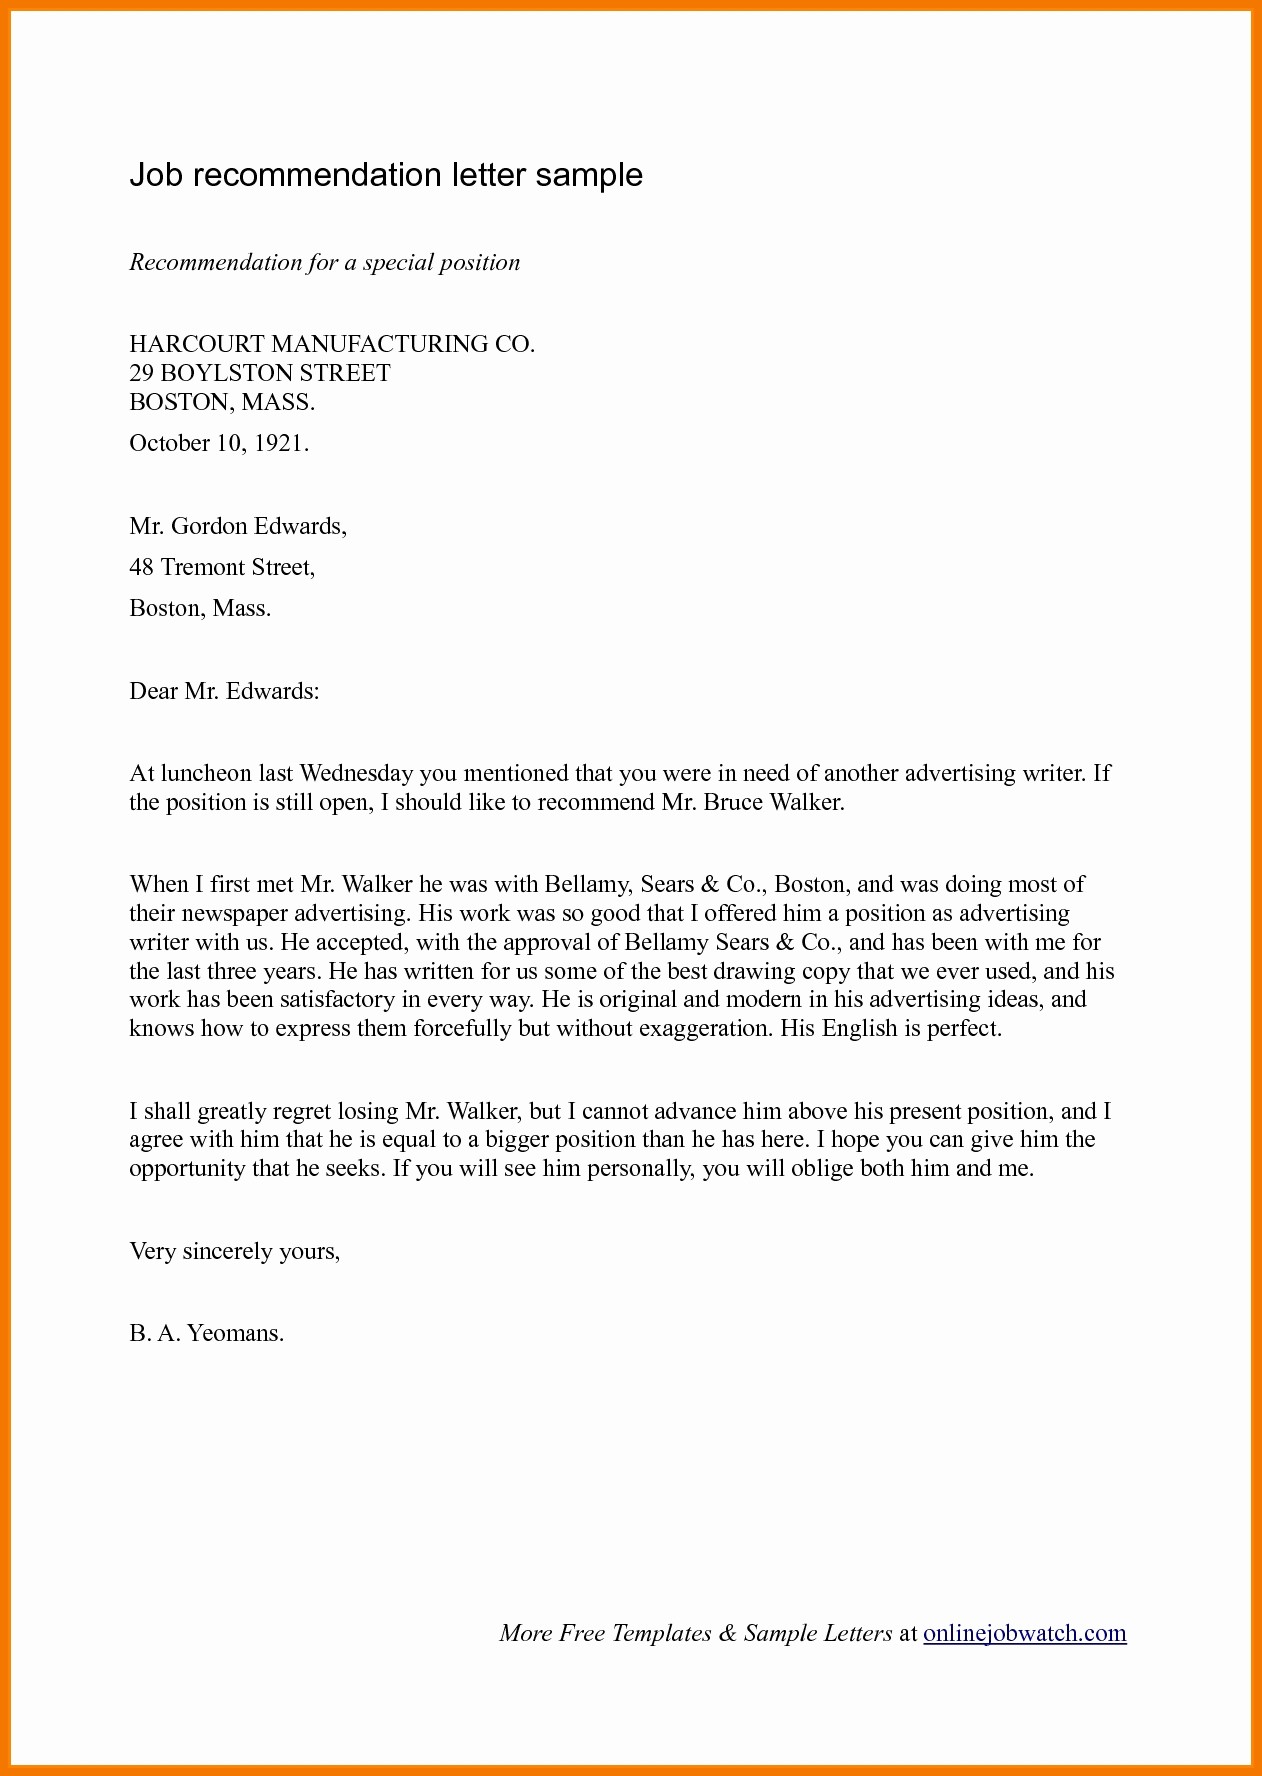 Job Recommendation Letter Sample Template New Job Reference Letter Template